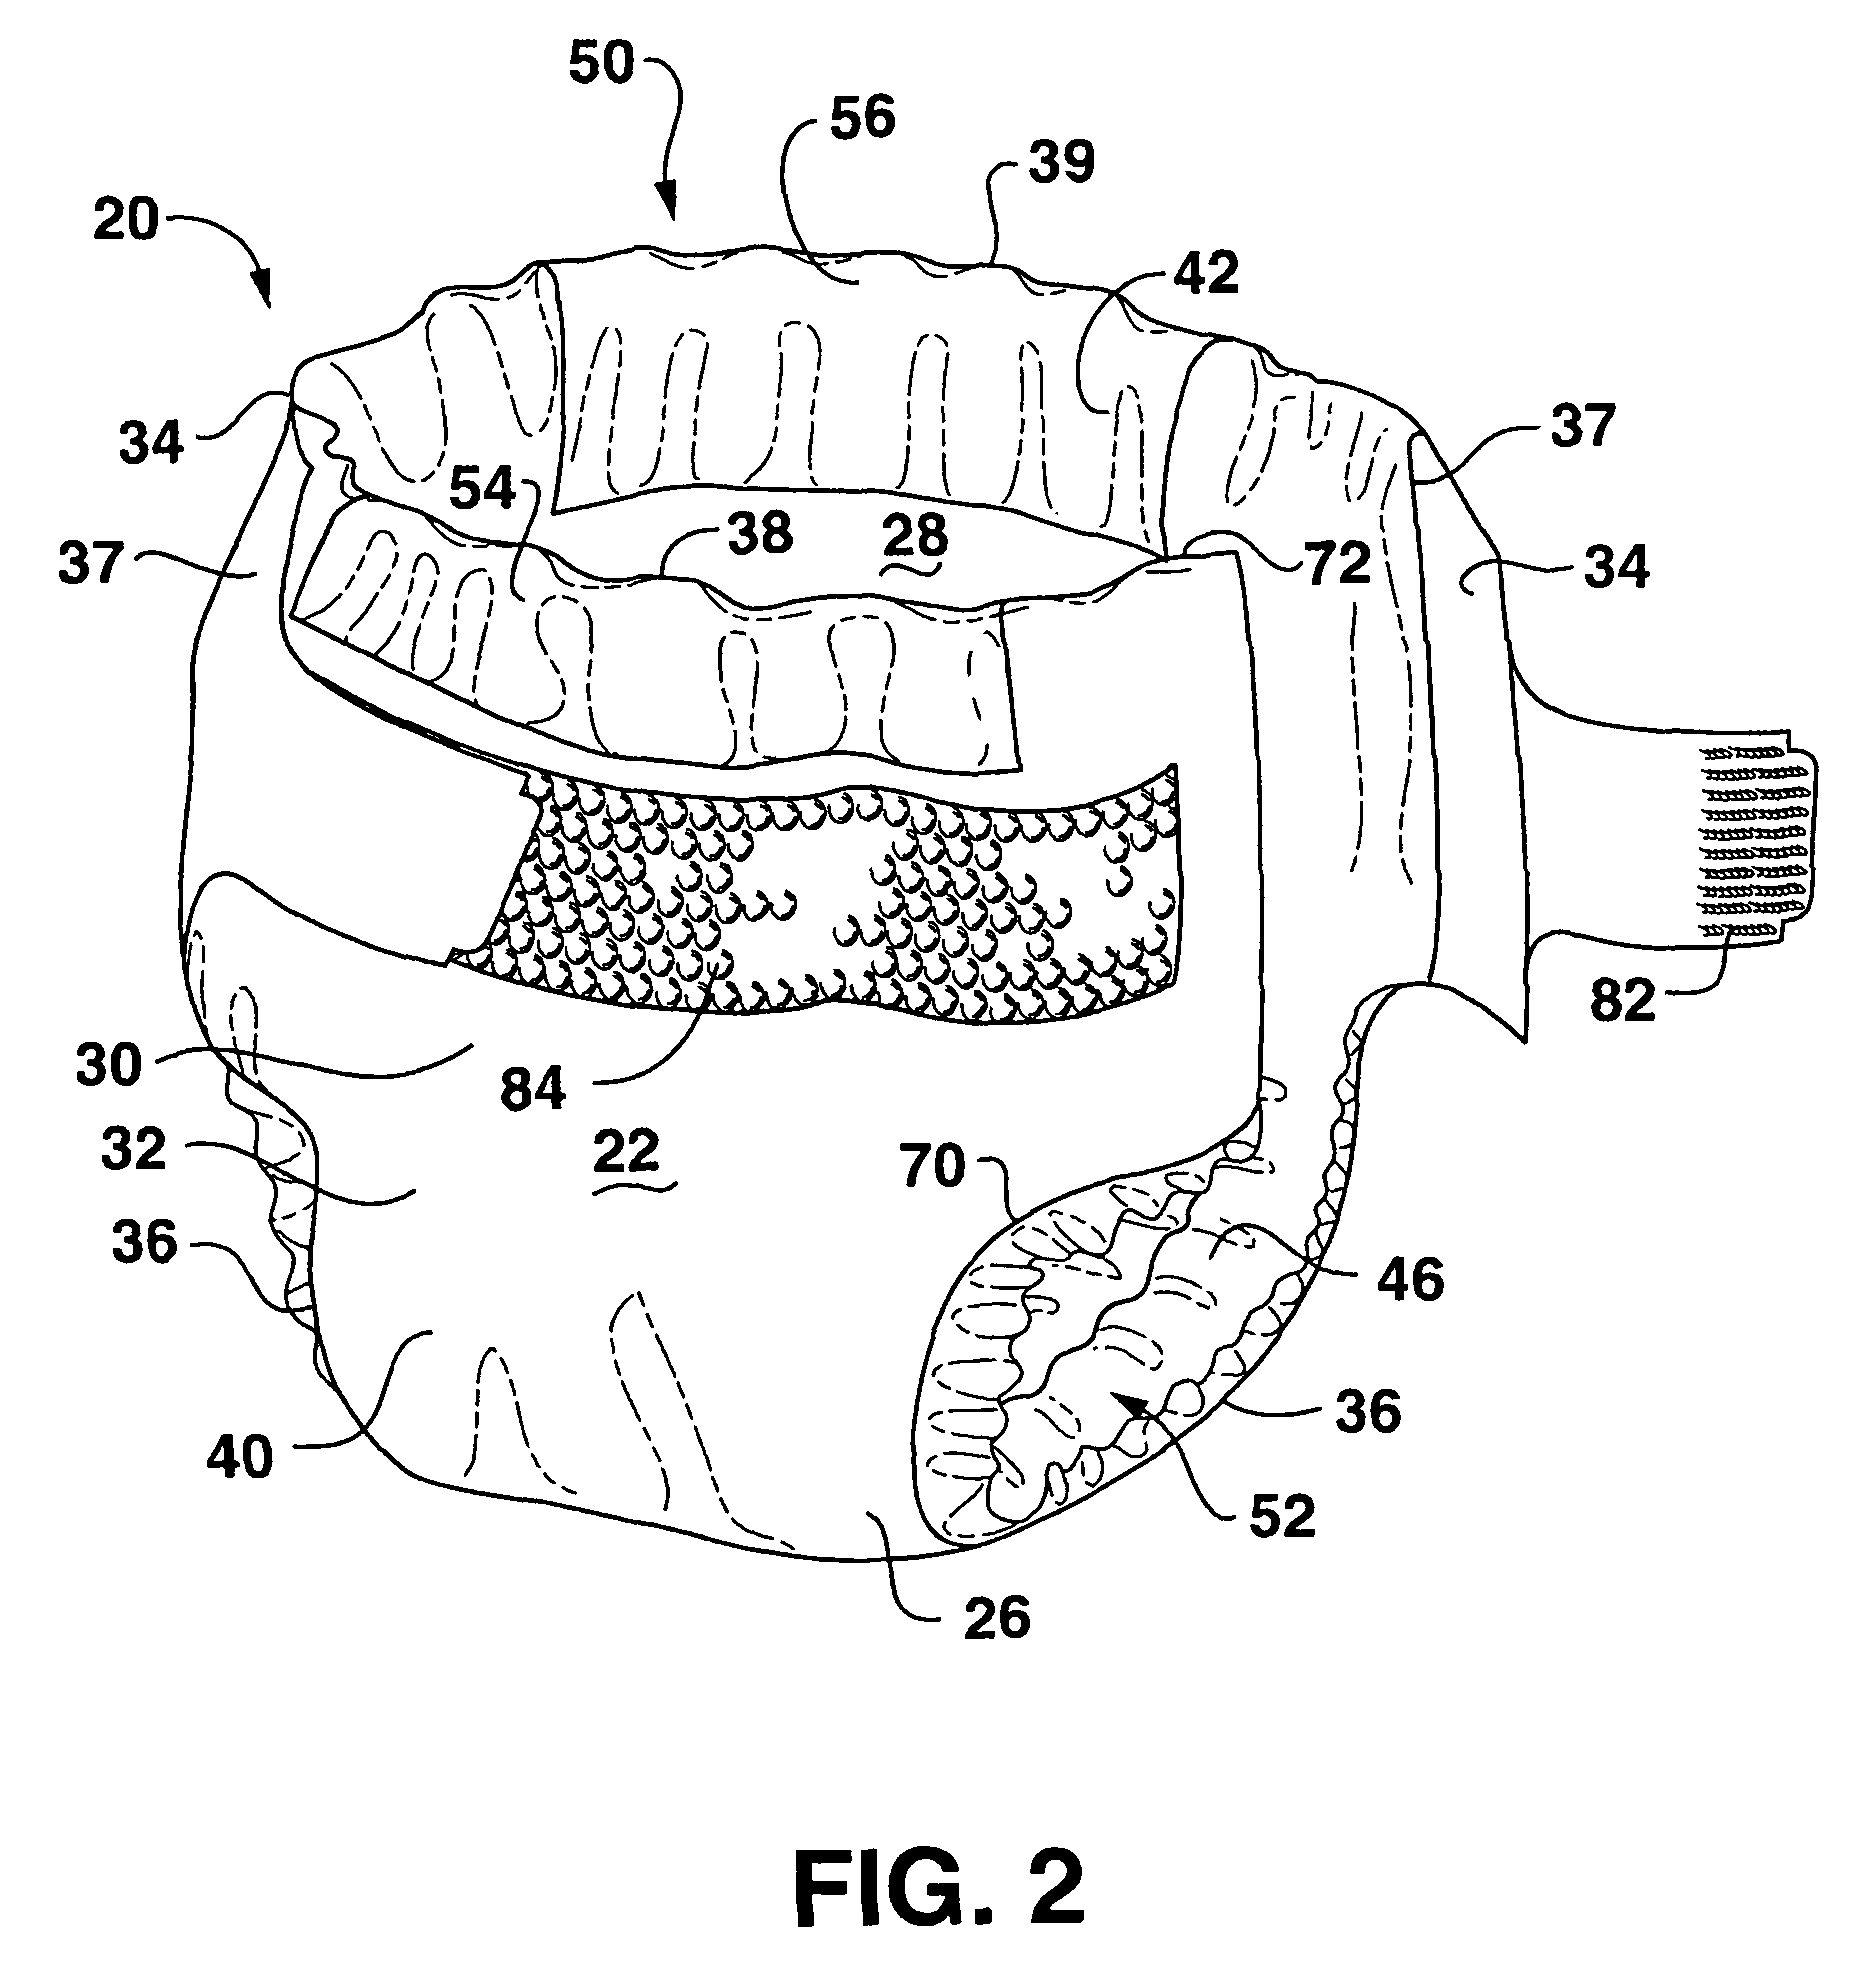 Absorbent articles having a waist region and corresponding fasteners that have matching stretch properties